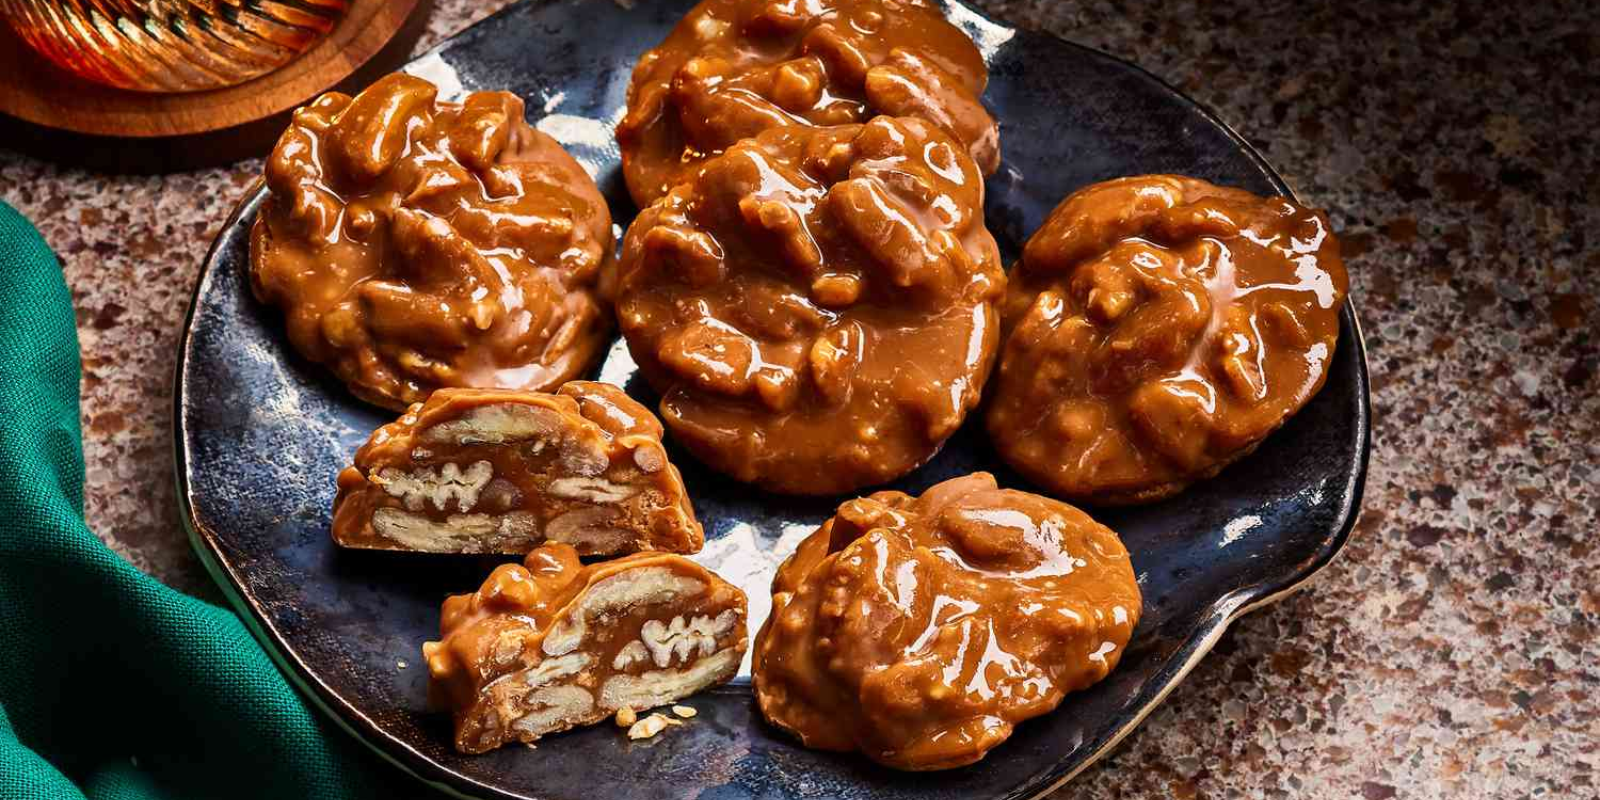 Celebrating Your National Caramel Day with 5 Irresistible Recipes